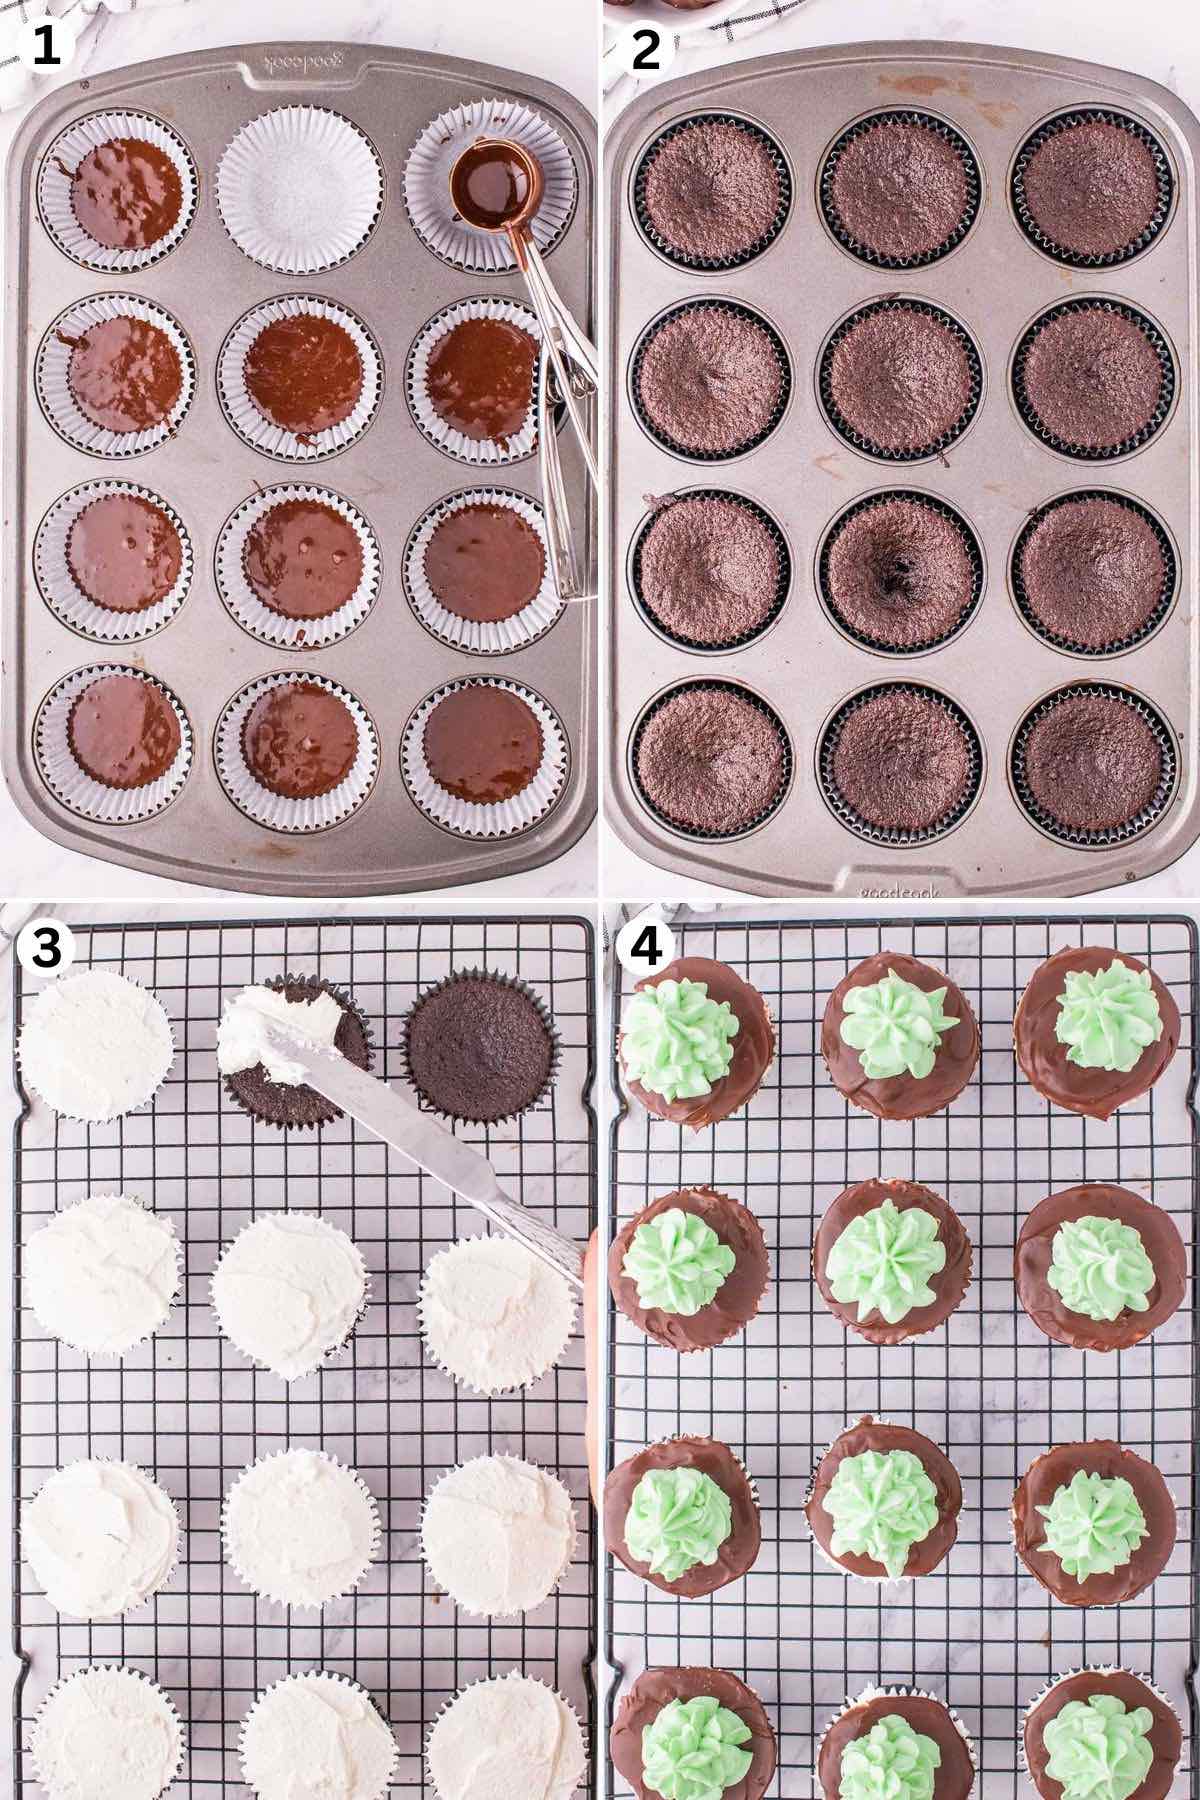 Fill the cupcake wells and bake. spread peppermint cream on top of the baked cupcake. pipe green frosting on top of the peppermint cream layer.